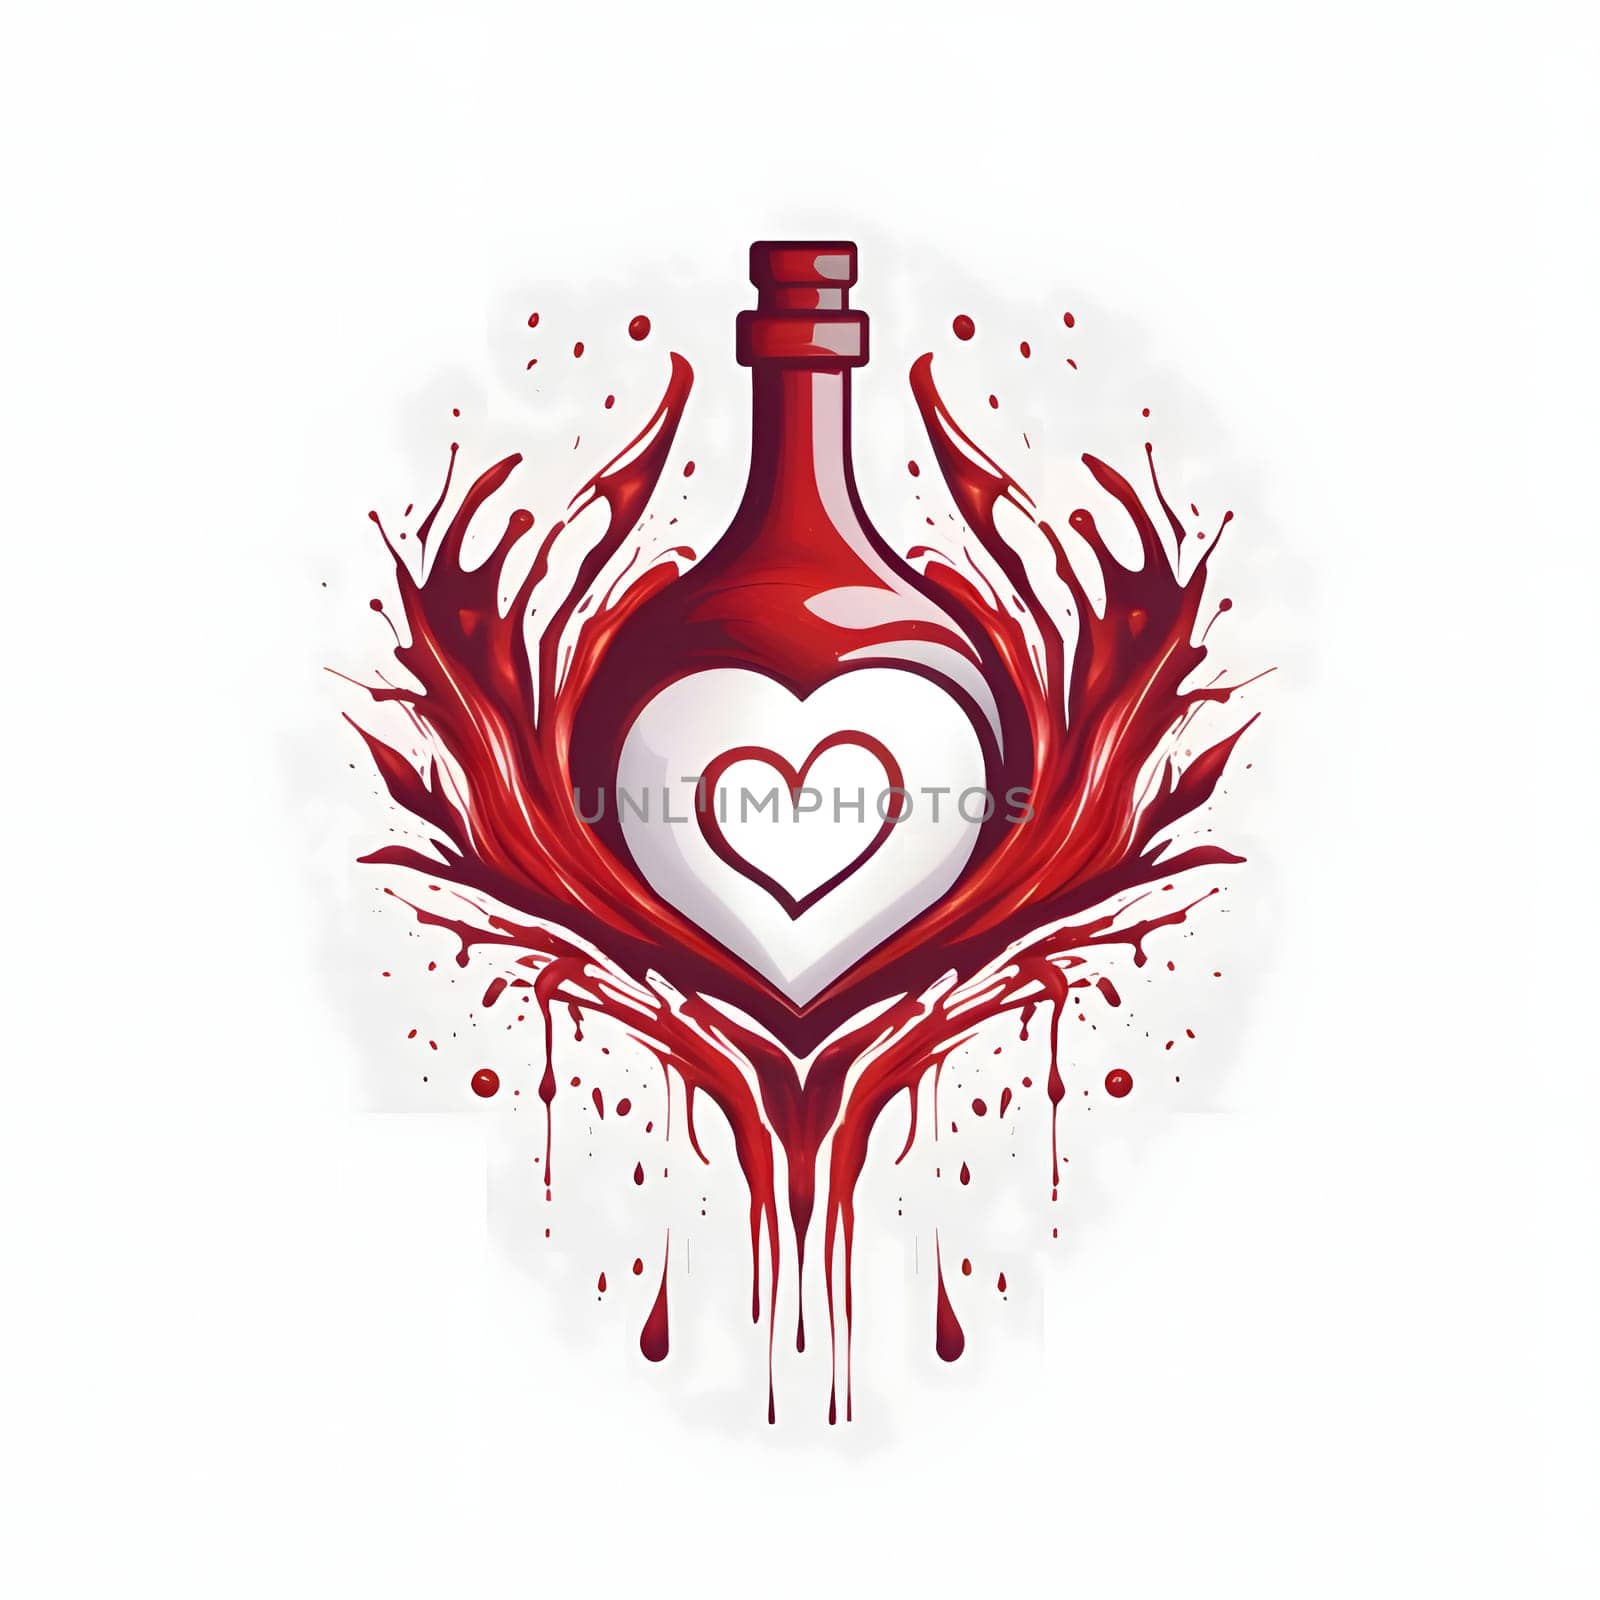 Concept Logo Red bottle with white and Red heart in the middle. Heart as a symbol of affection and love. The time of falling in love and love.